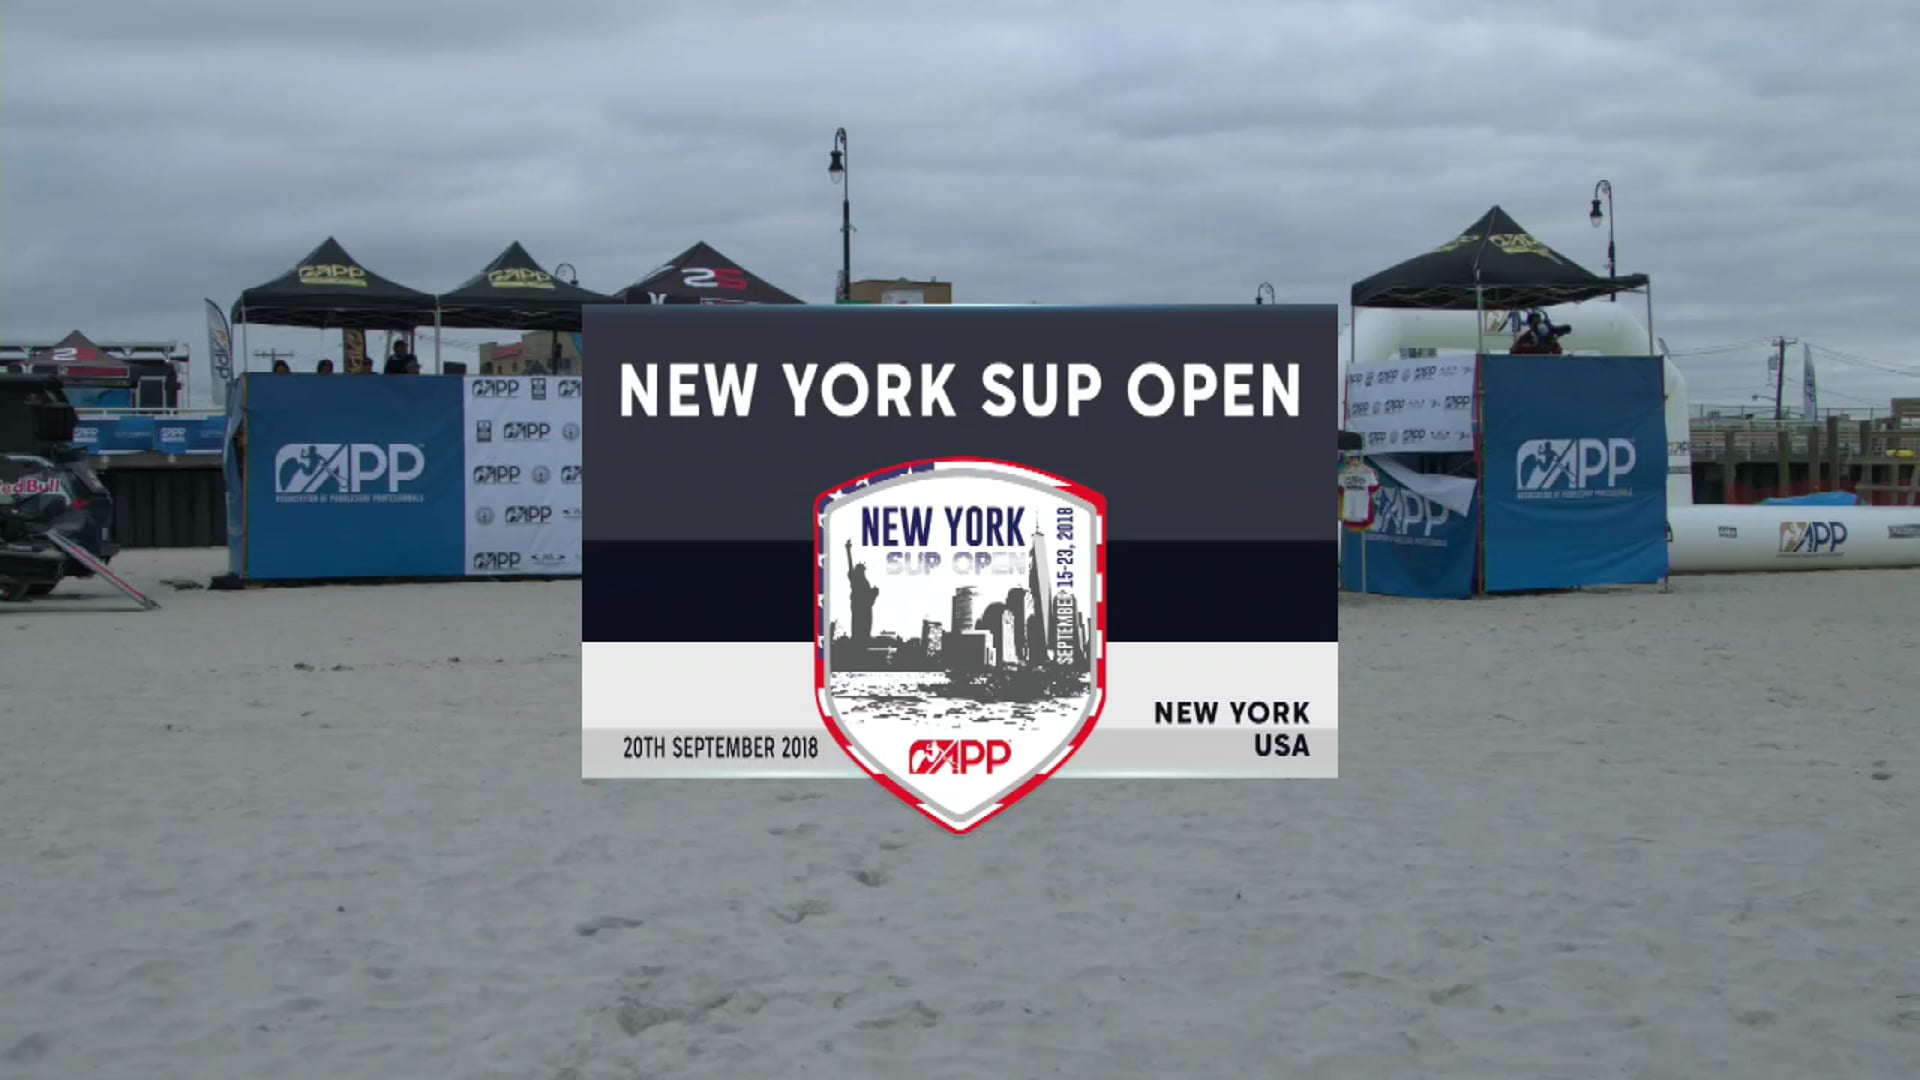 NY SUP OPEN - SURF DAY 1